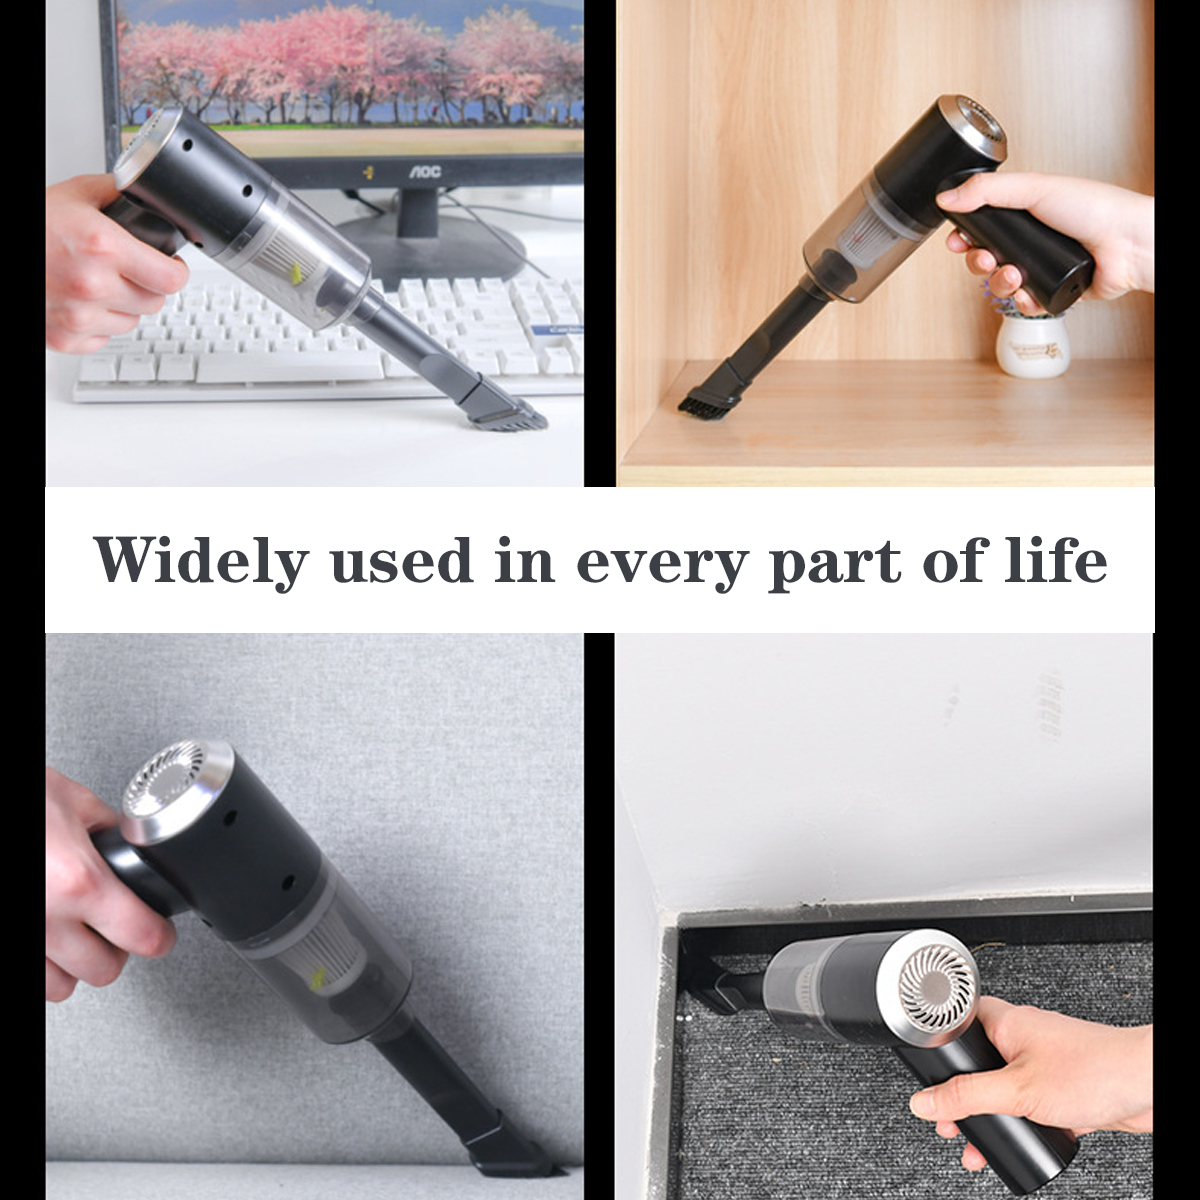 120W-Cordless-HandHeld-Vacuum-Cleaner-Mini-Portable-Dust-Cleaner-for-Car-Office-Home-8000Pa-1830652-11